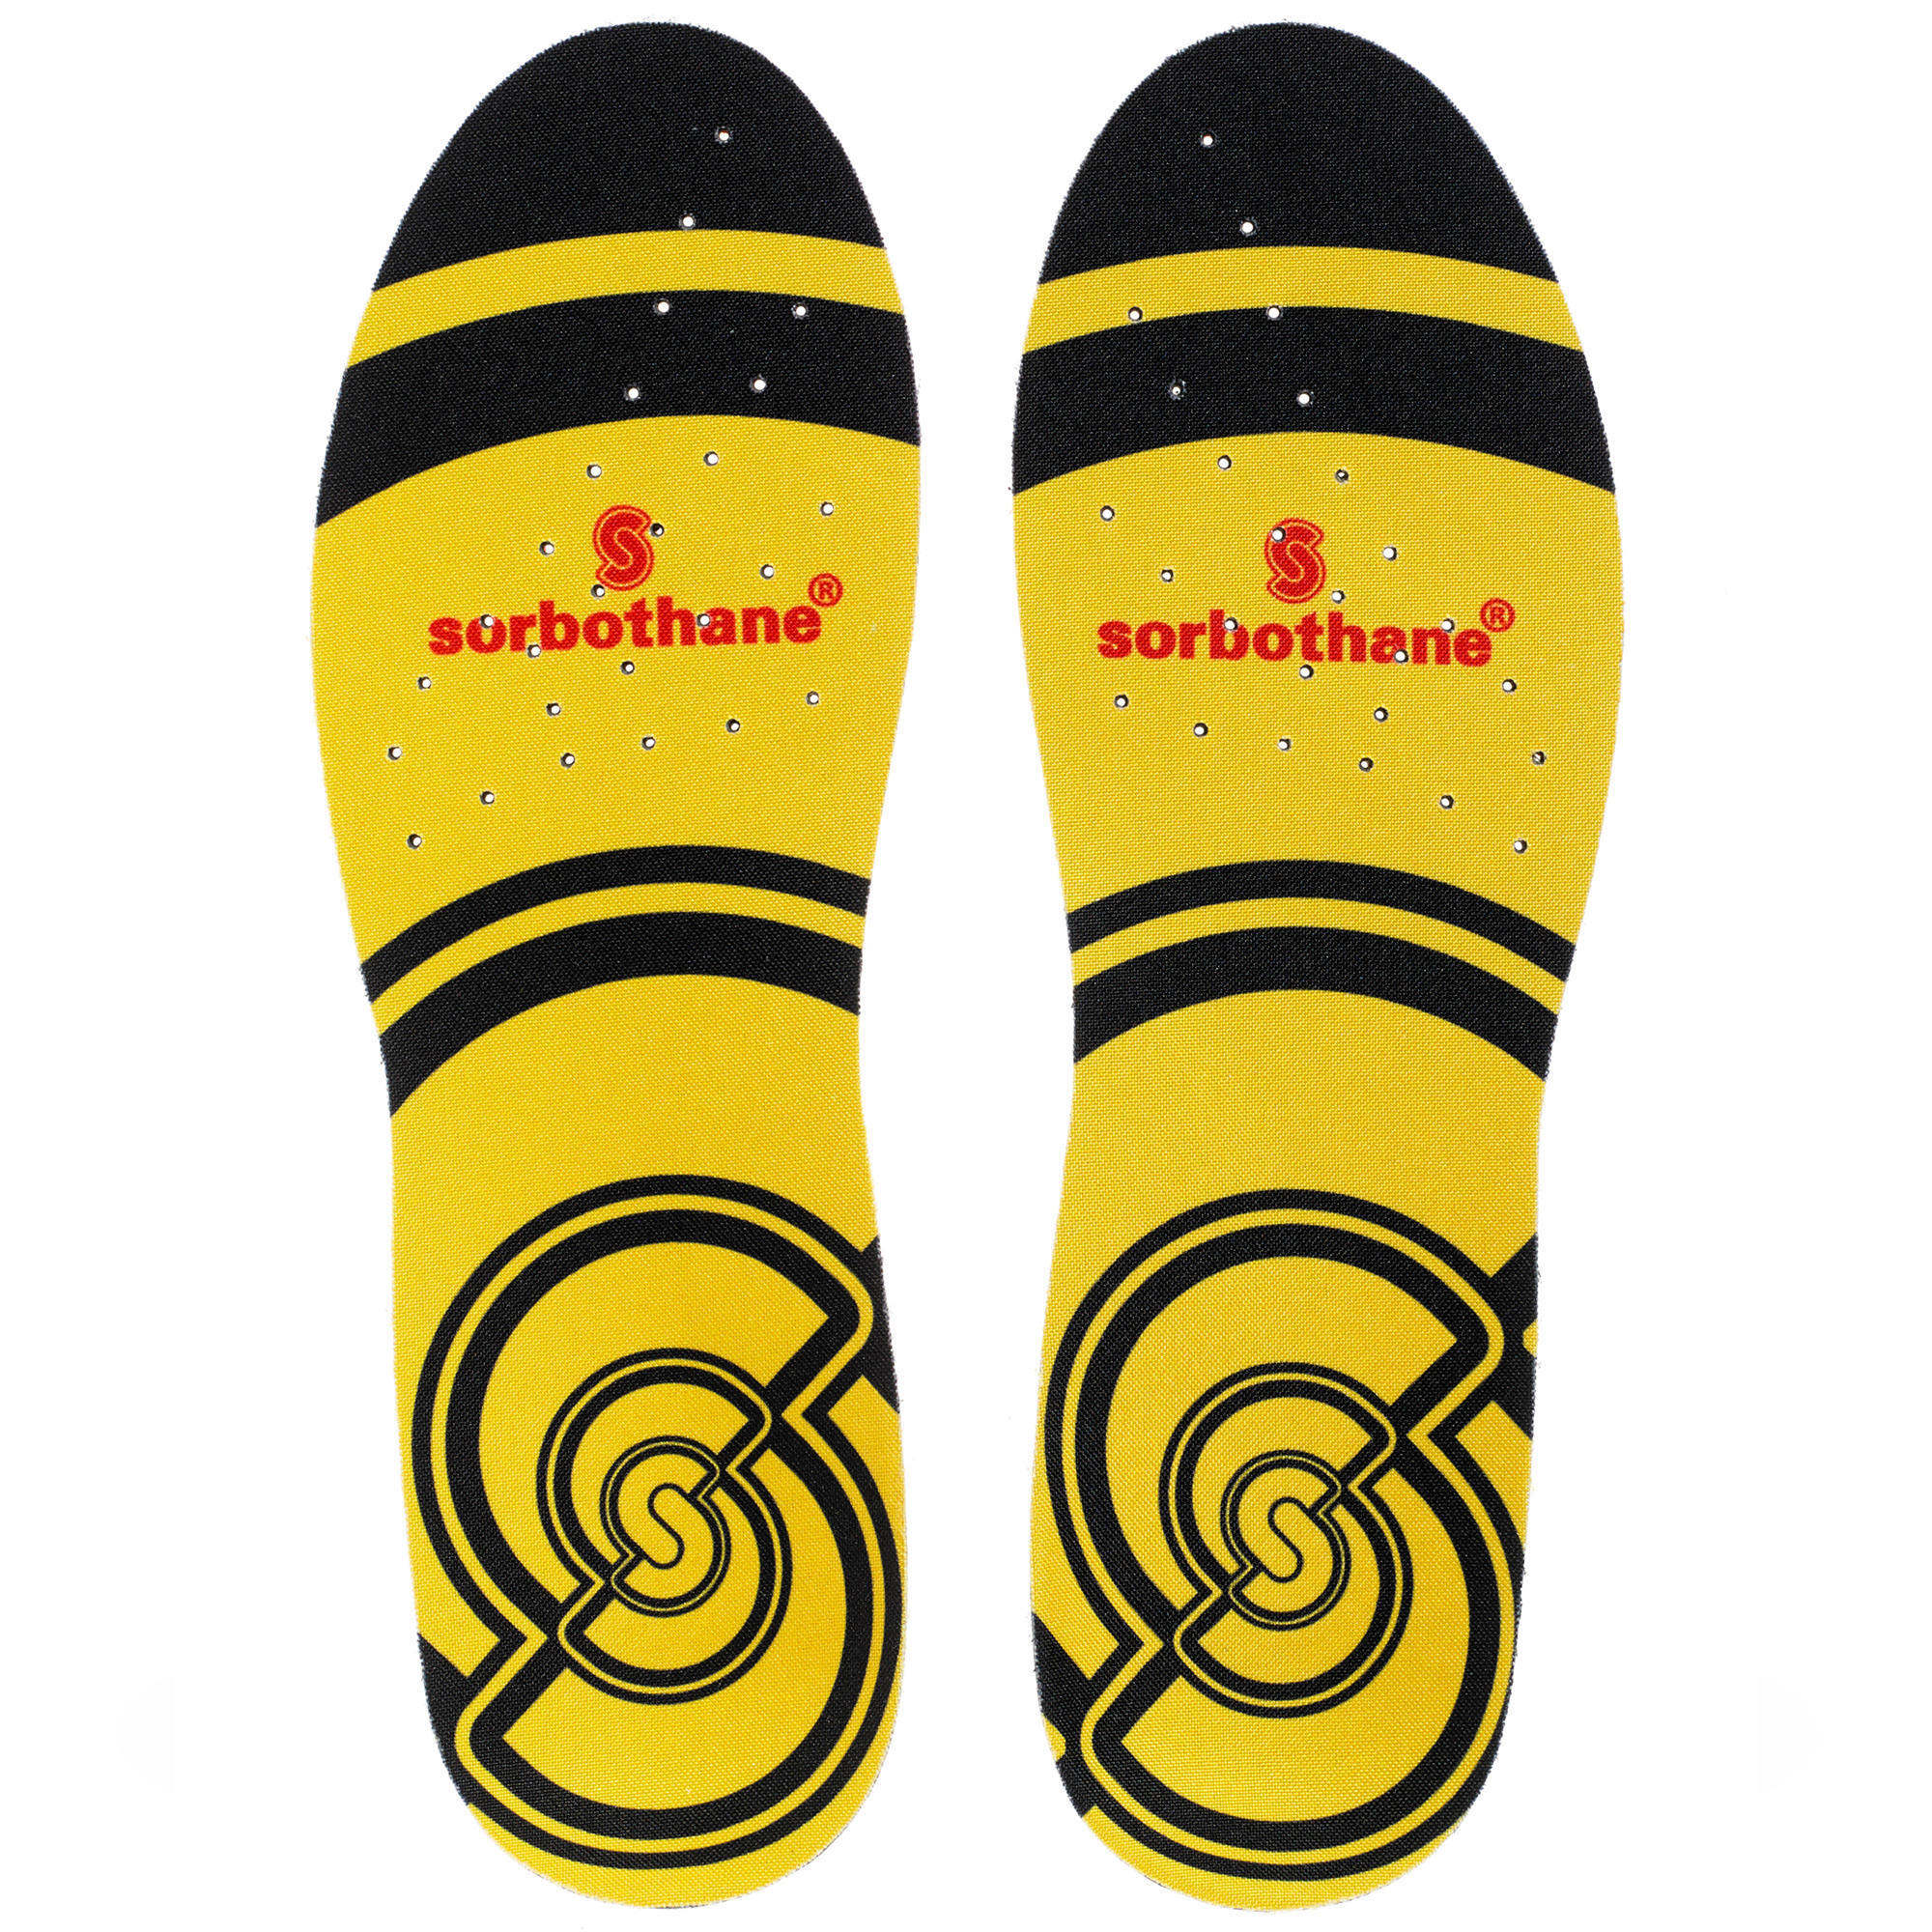 Refurbished Sorbothane Double Strike Insoles -A Grade 1/5